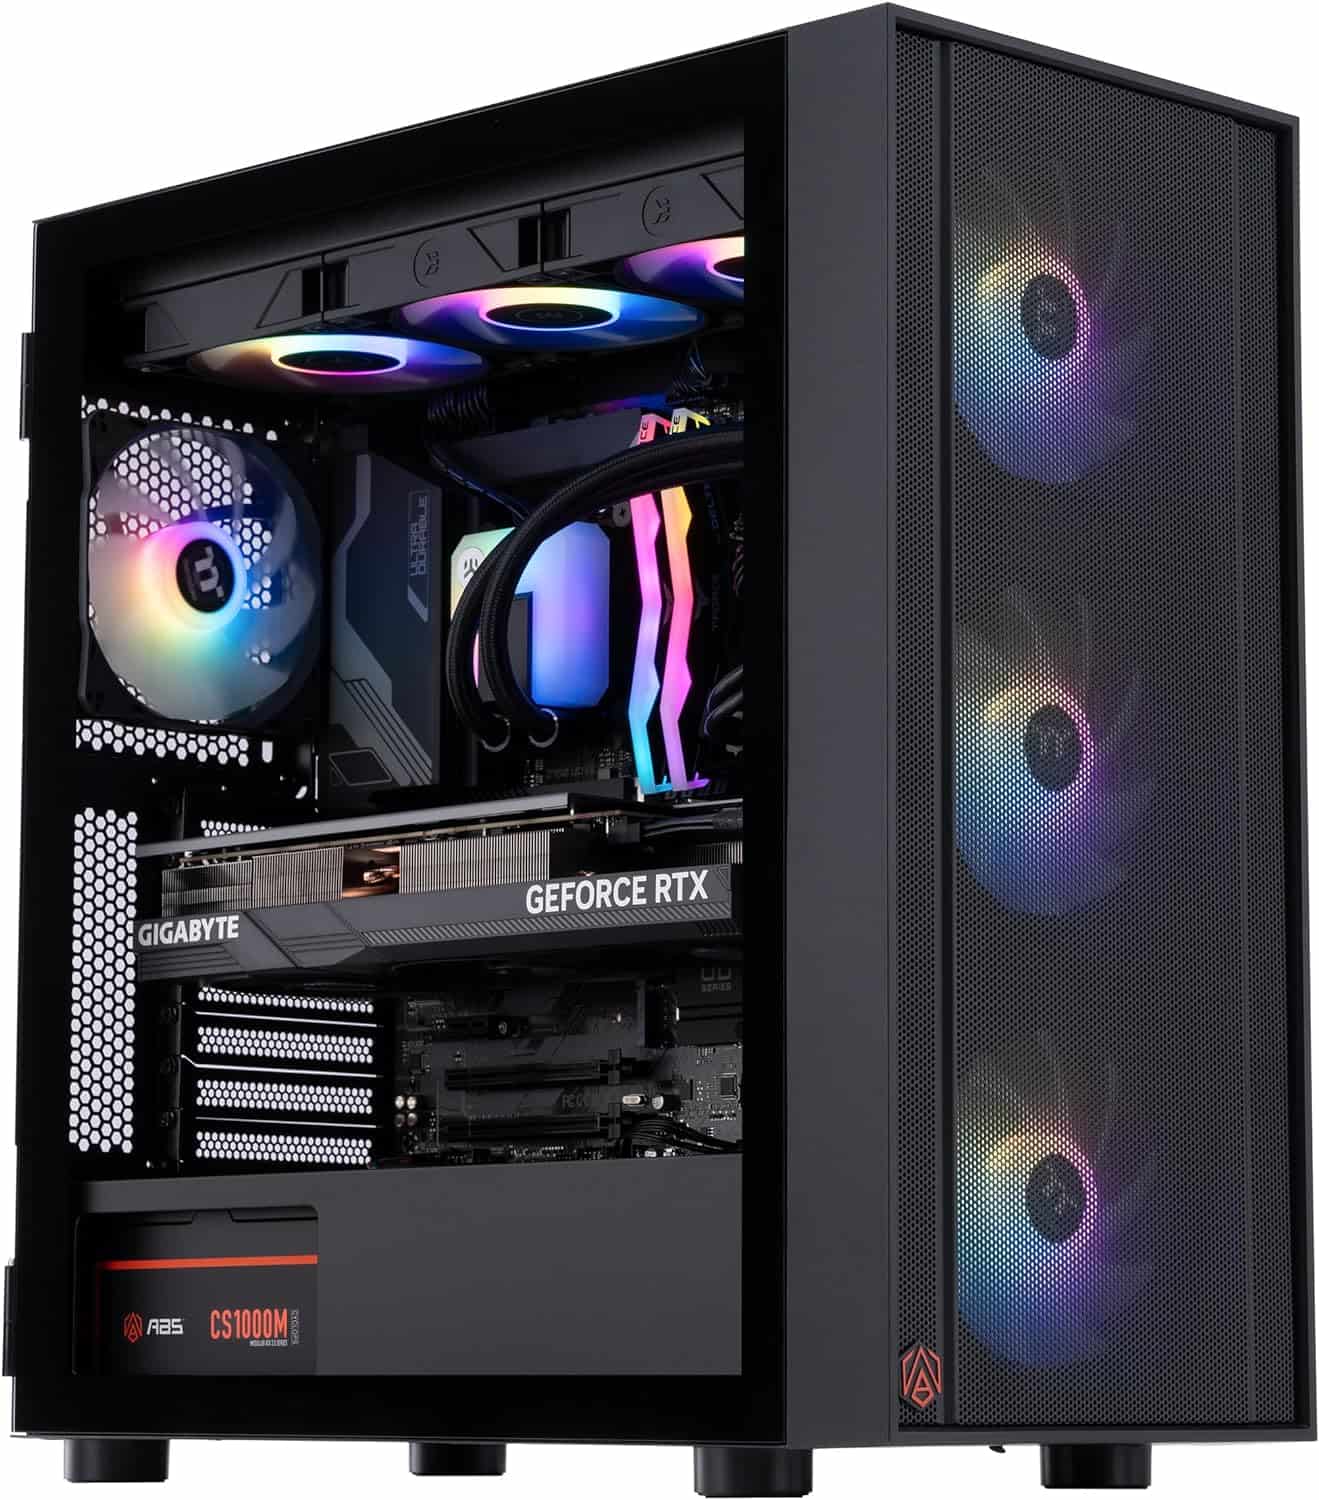 High-end ABS Eurus Aqua gaming PC with RTX 4090, RGB lighting, and visible components through a glass side panel.